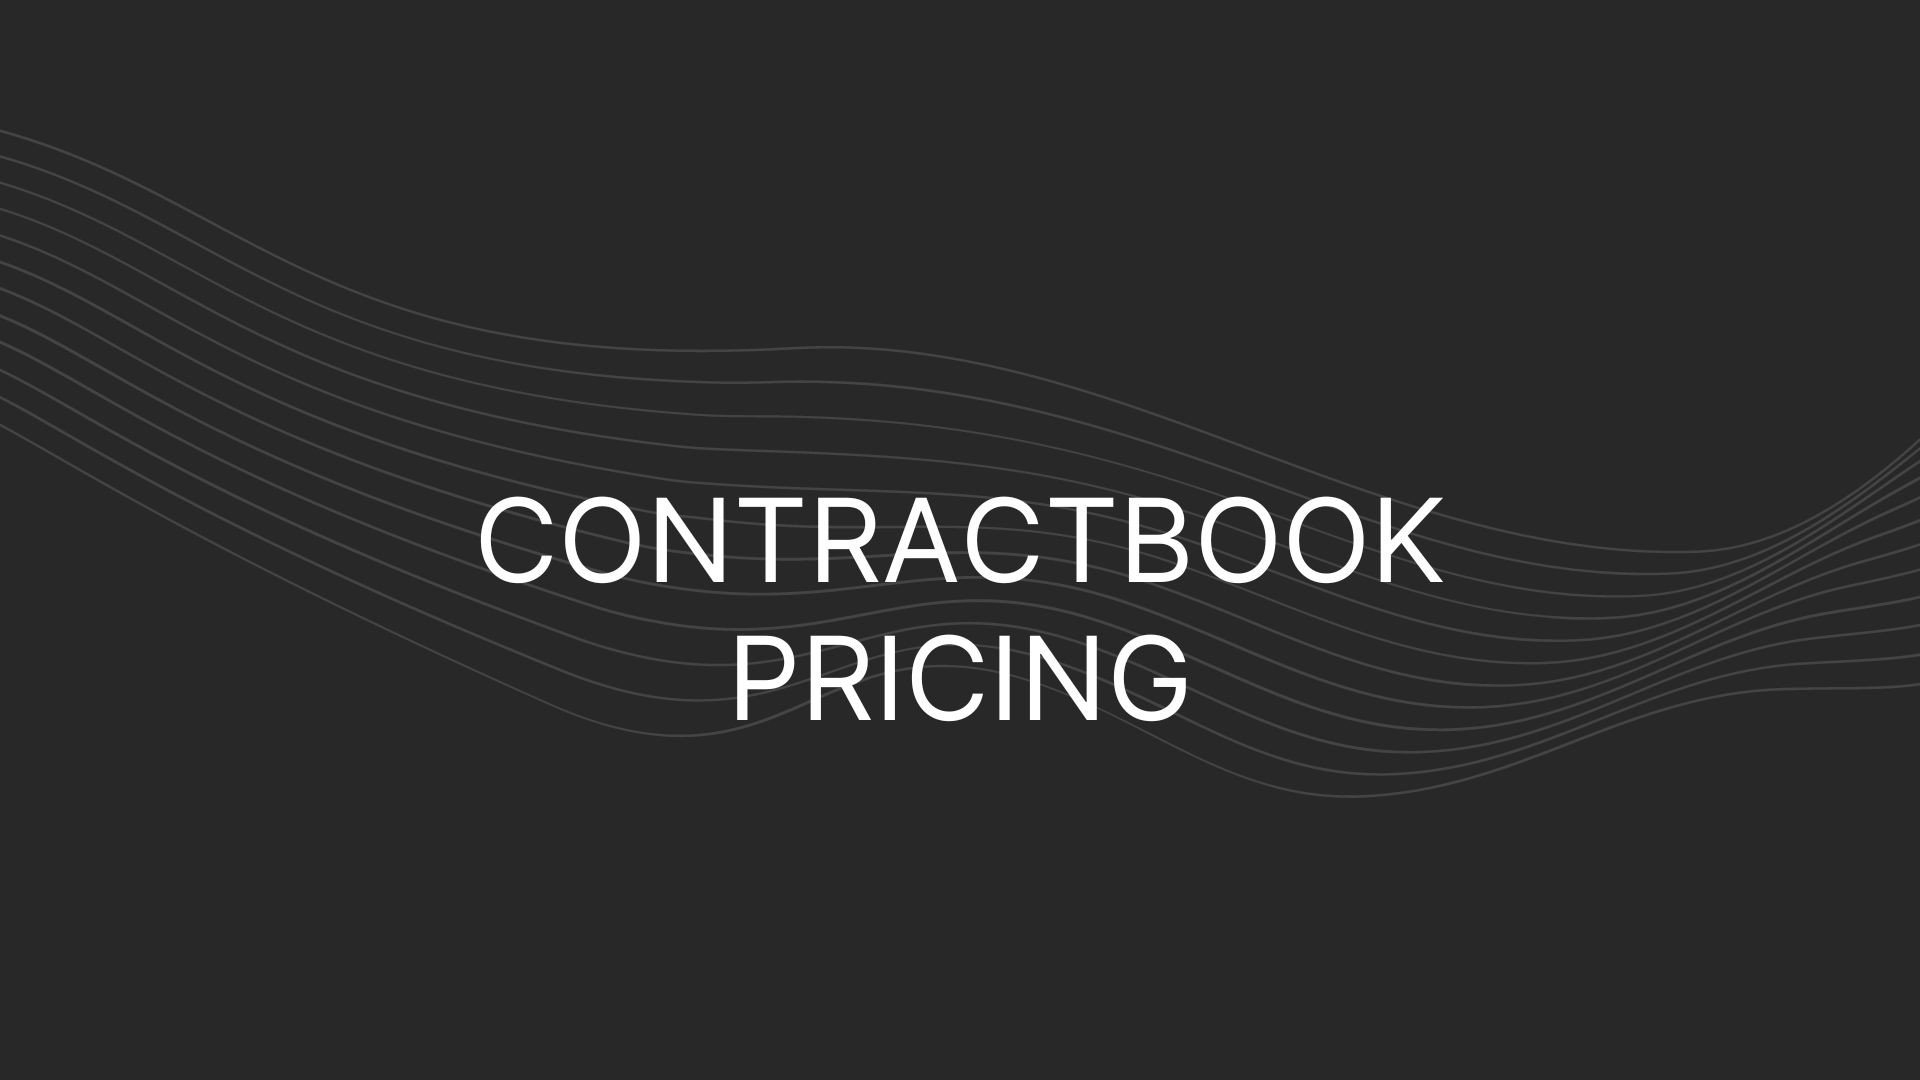 Contractbook Pricing